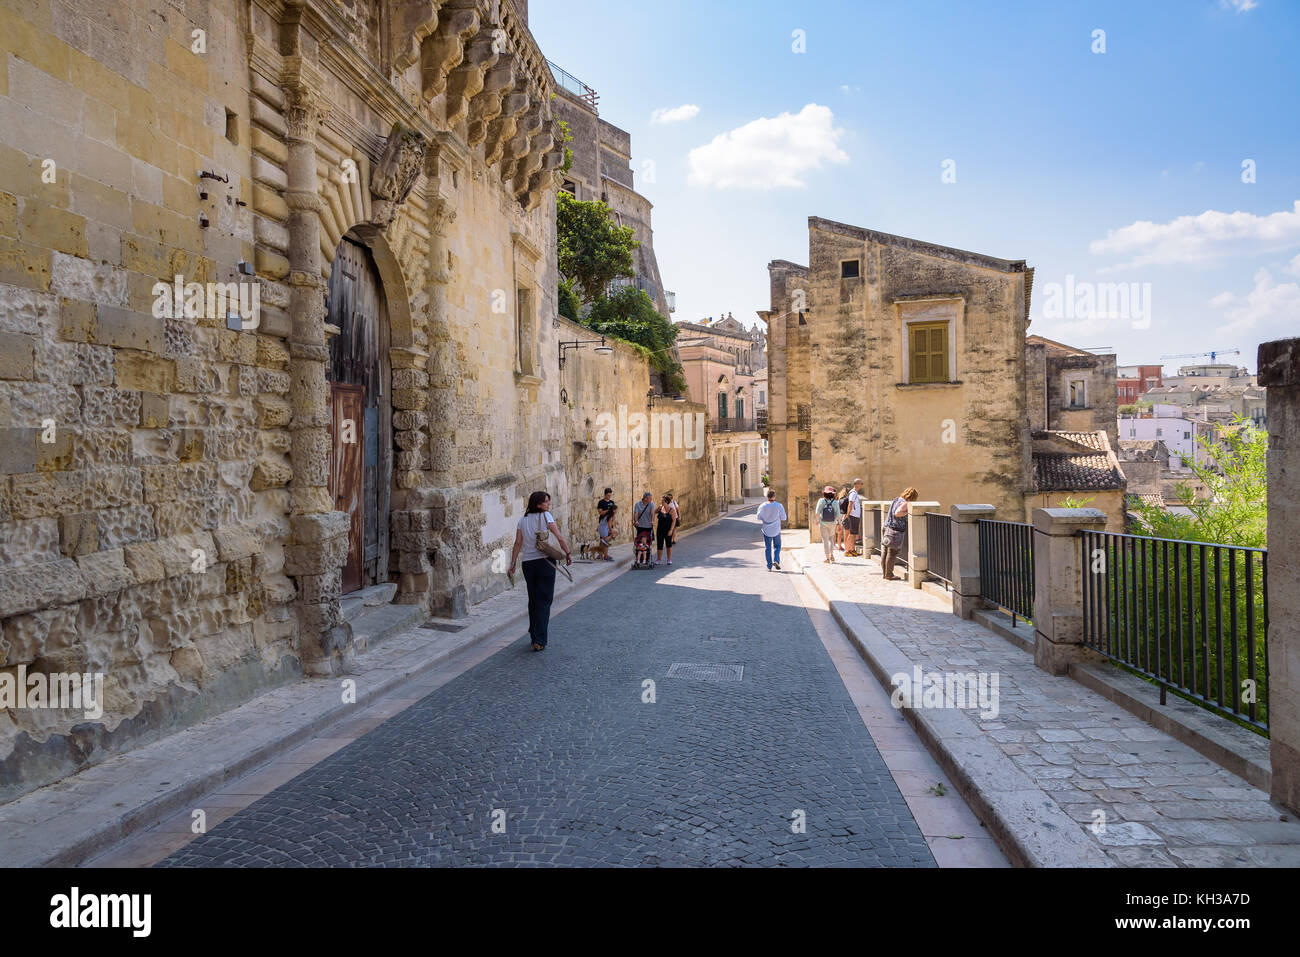 Matera, Italy - September 2, 2016: Tourists visit Via Duomo street leading to Piazza del Duomi in Matera. Stock Photo